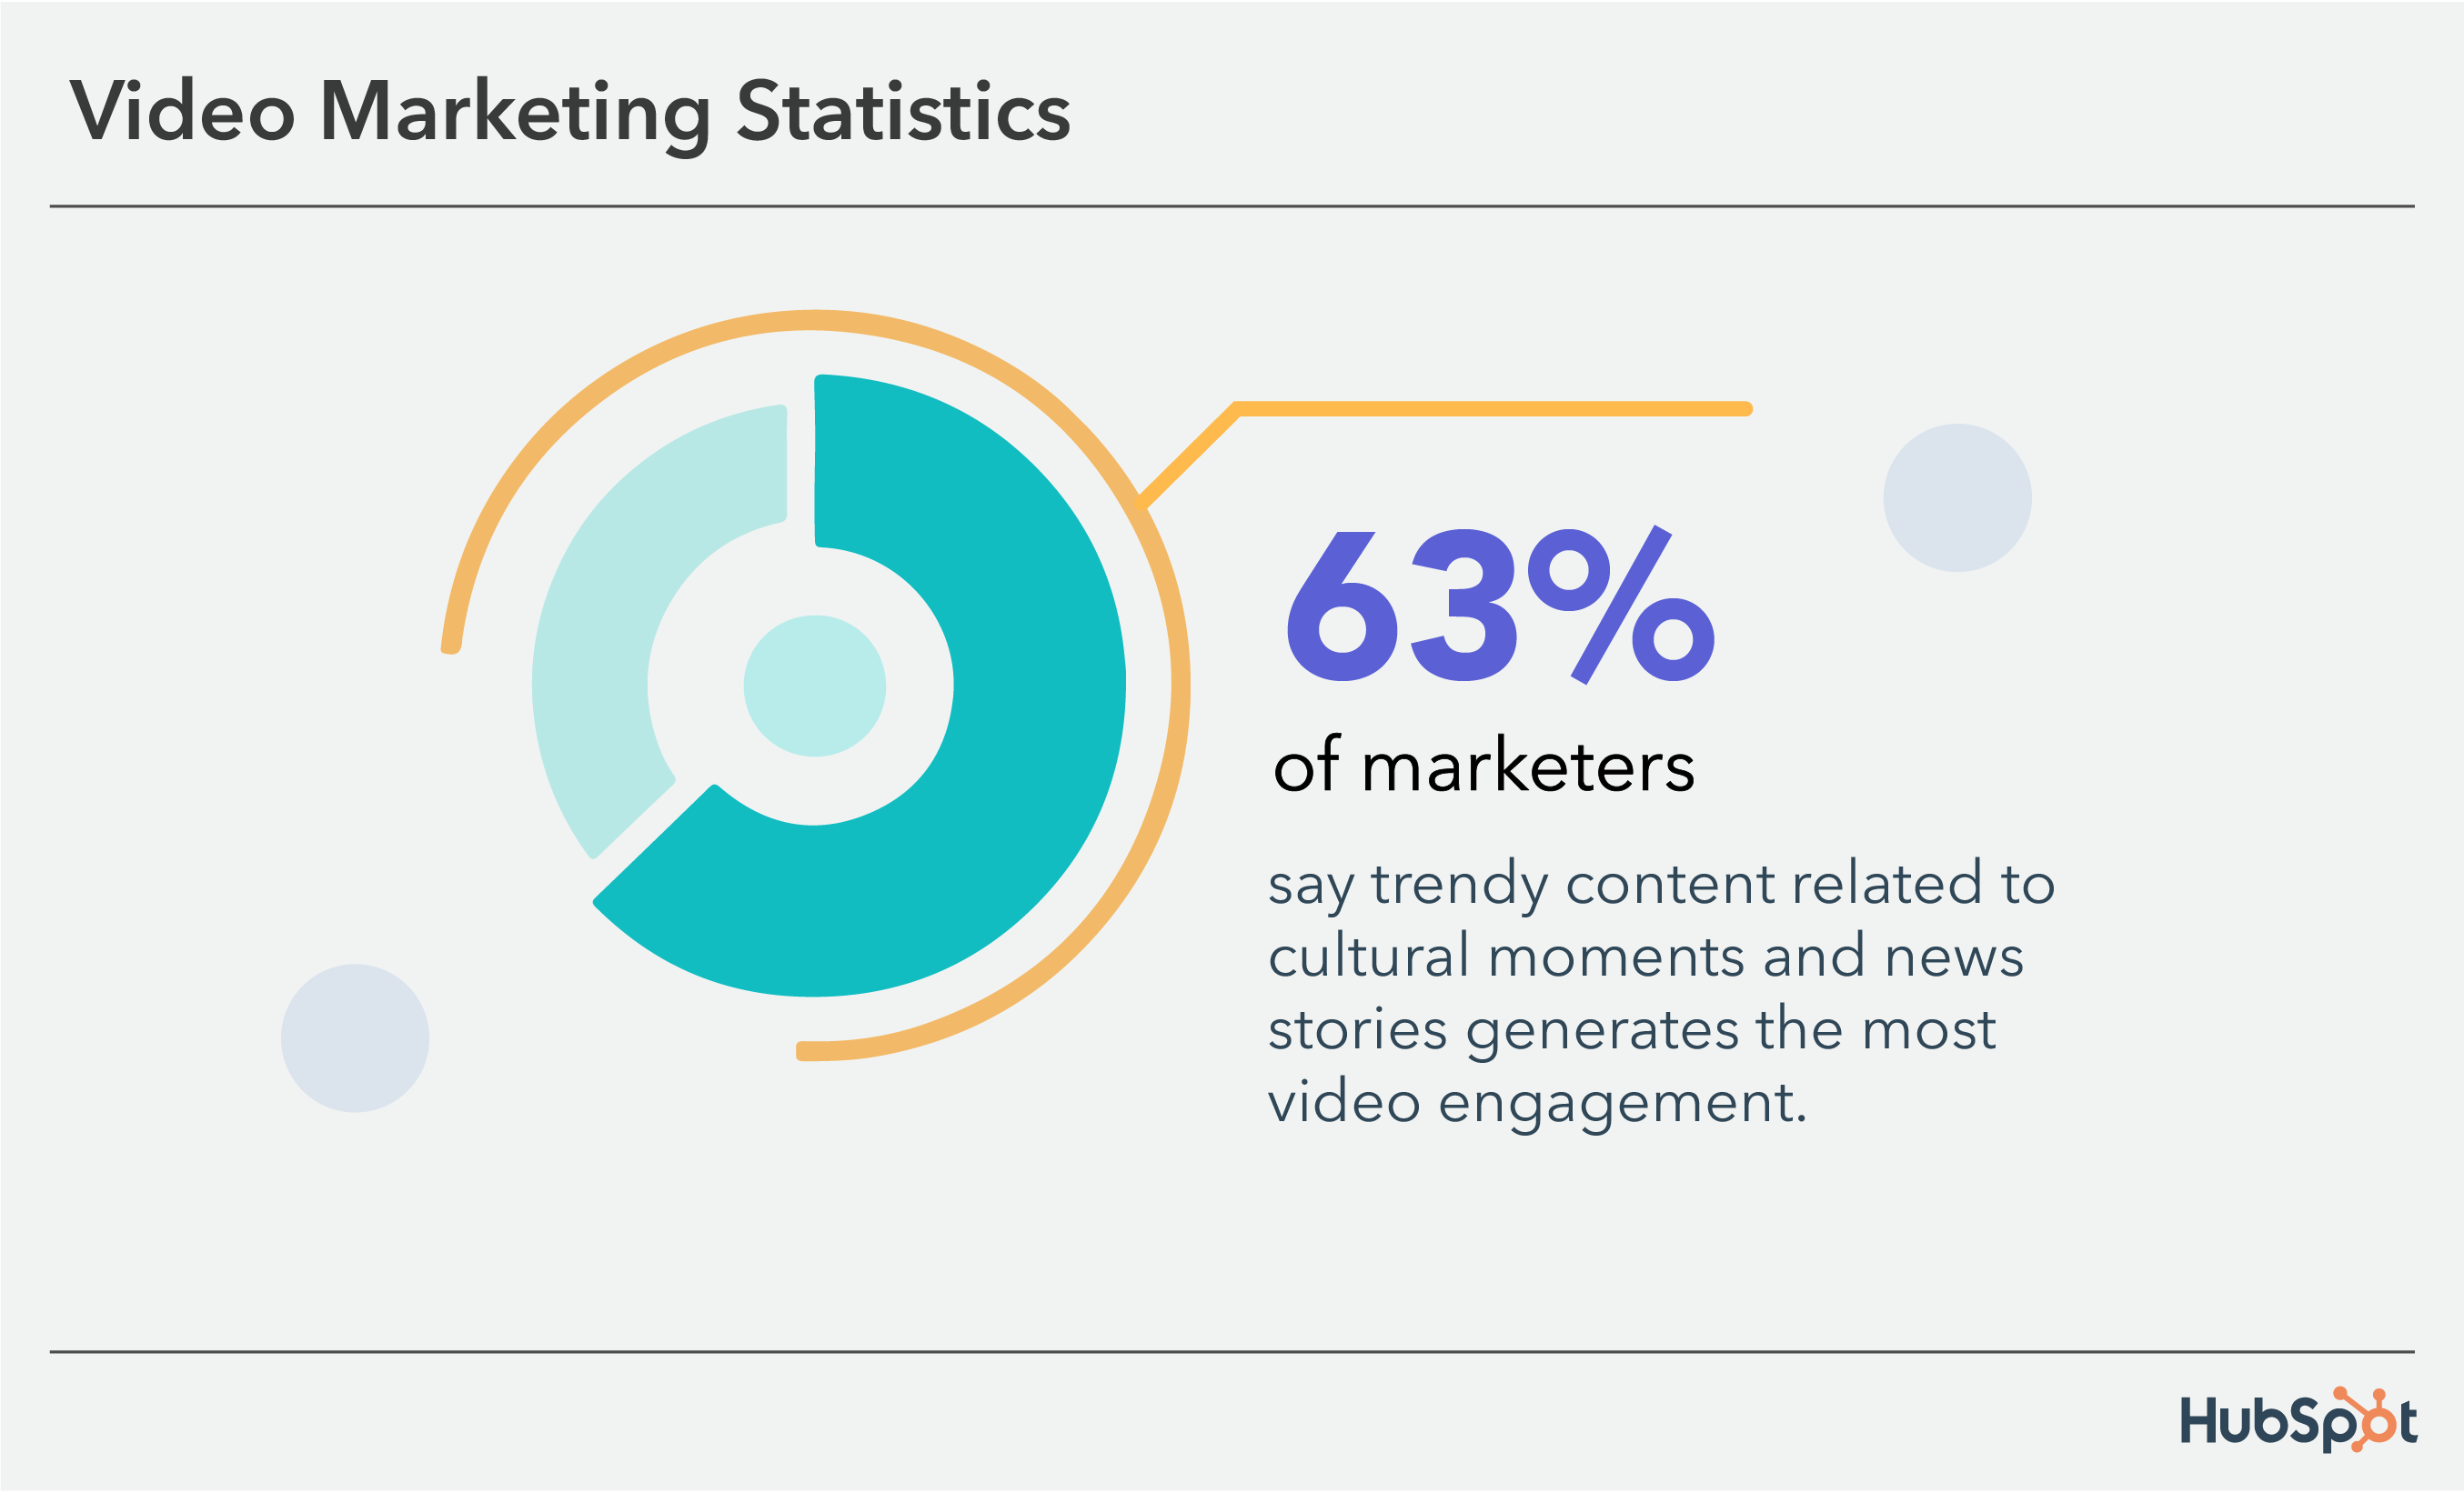 video marketing statistics: 63% of marketers say fashion content gets the most video engagement